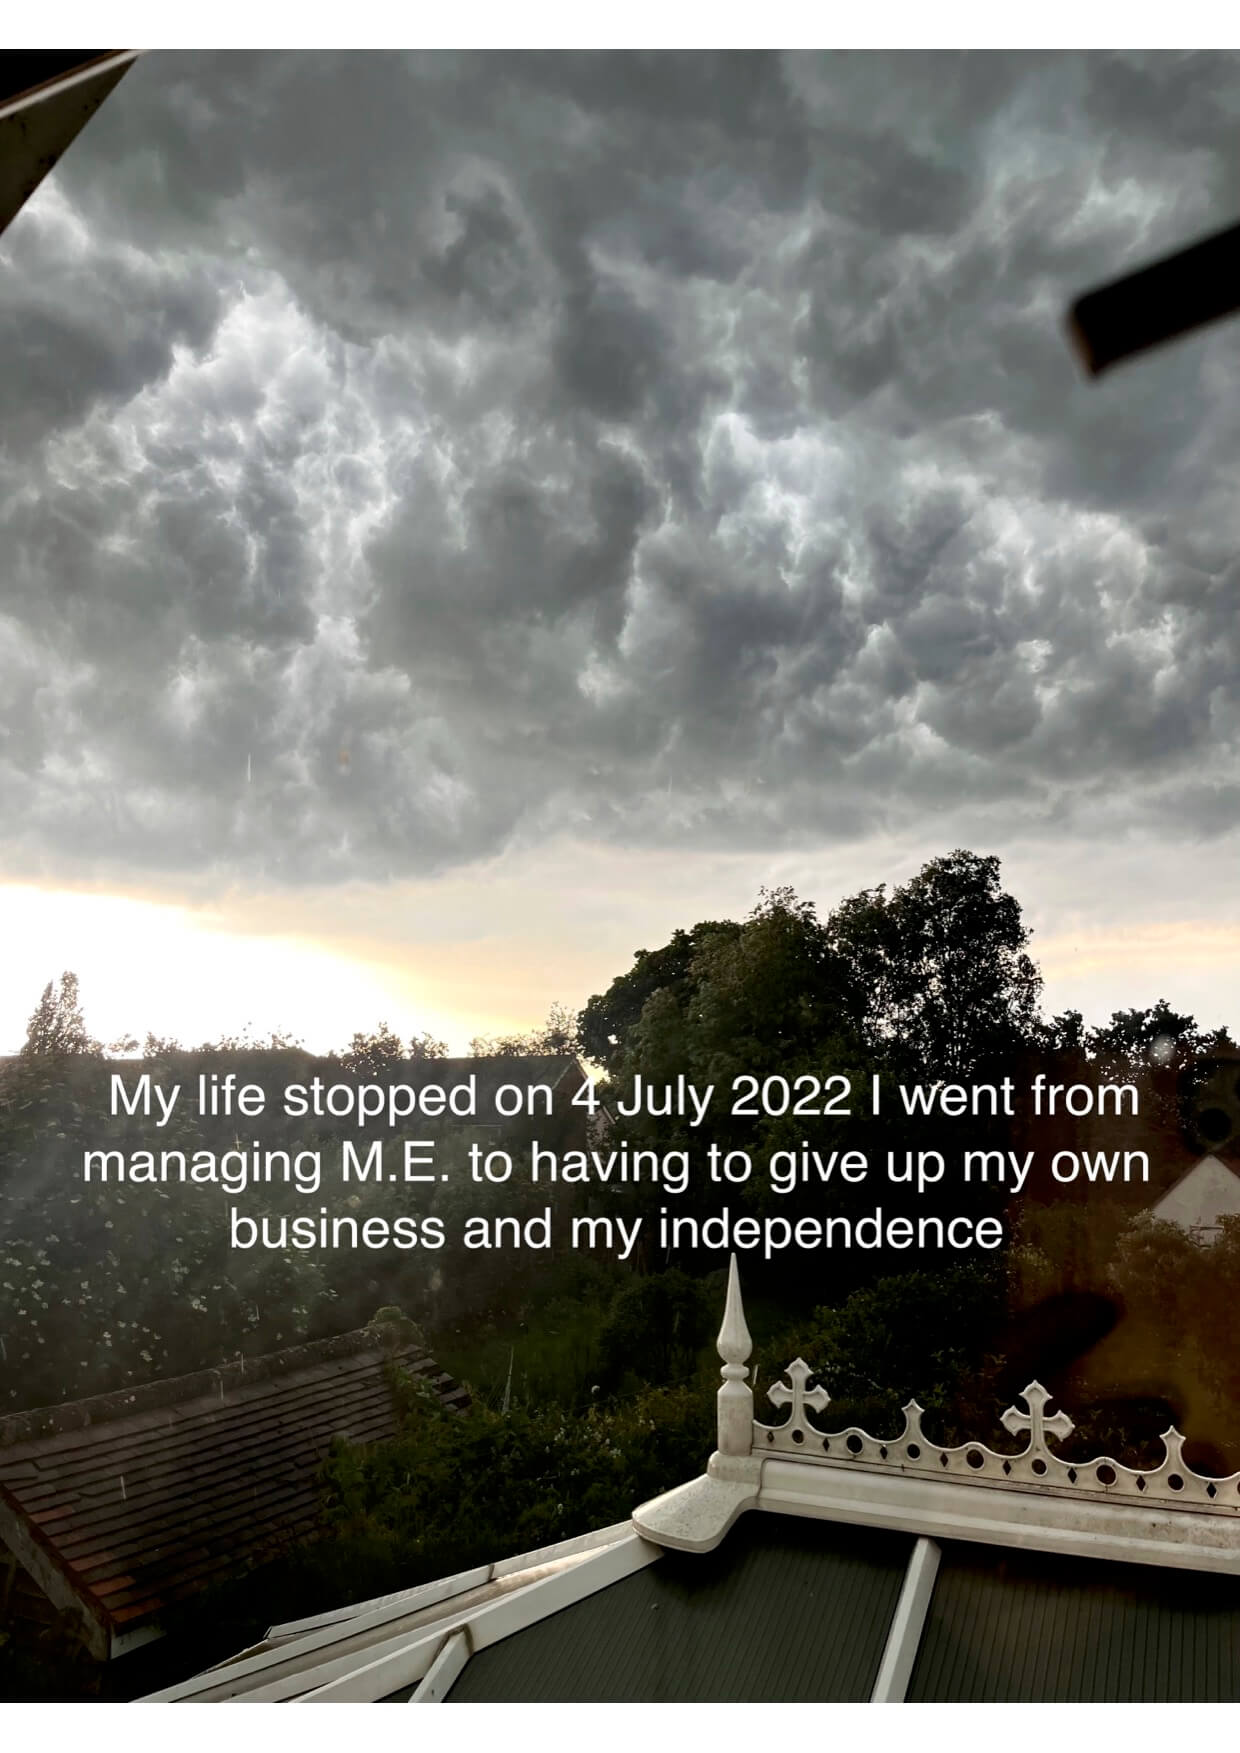 Dark clouds over a town. White text reads, “My life stopped on 4 July 2022. I went from managing my ME to having to give up my own business and independence.”